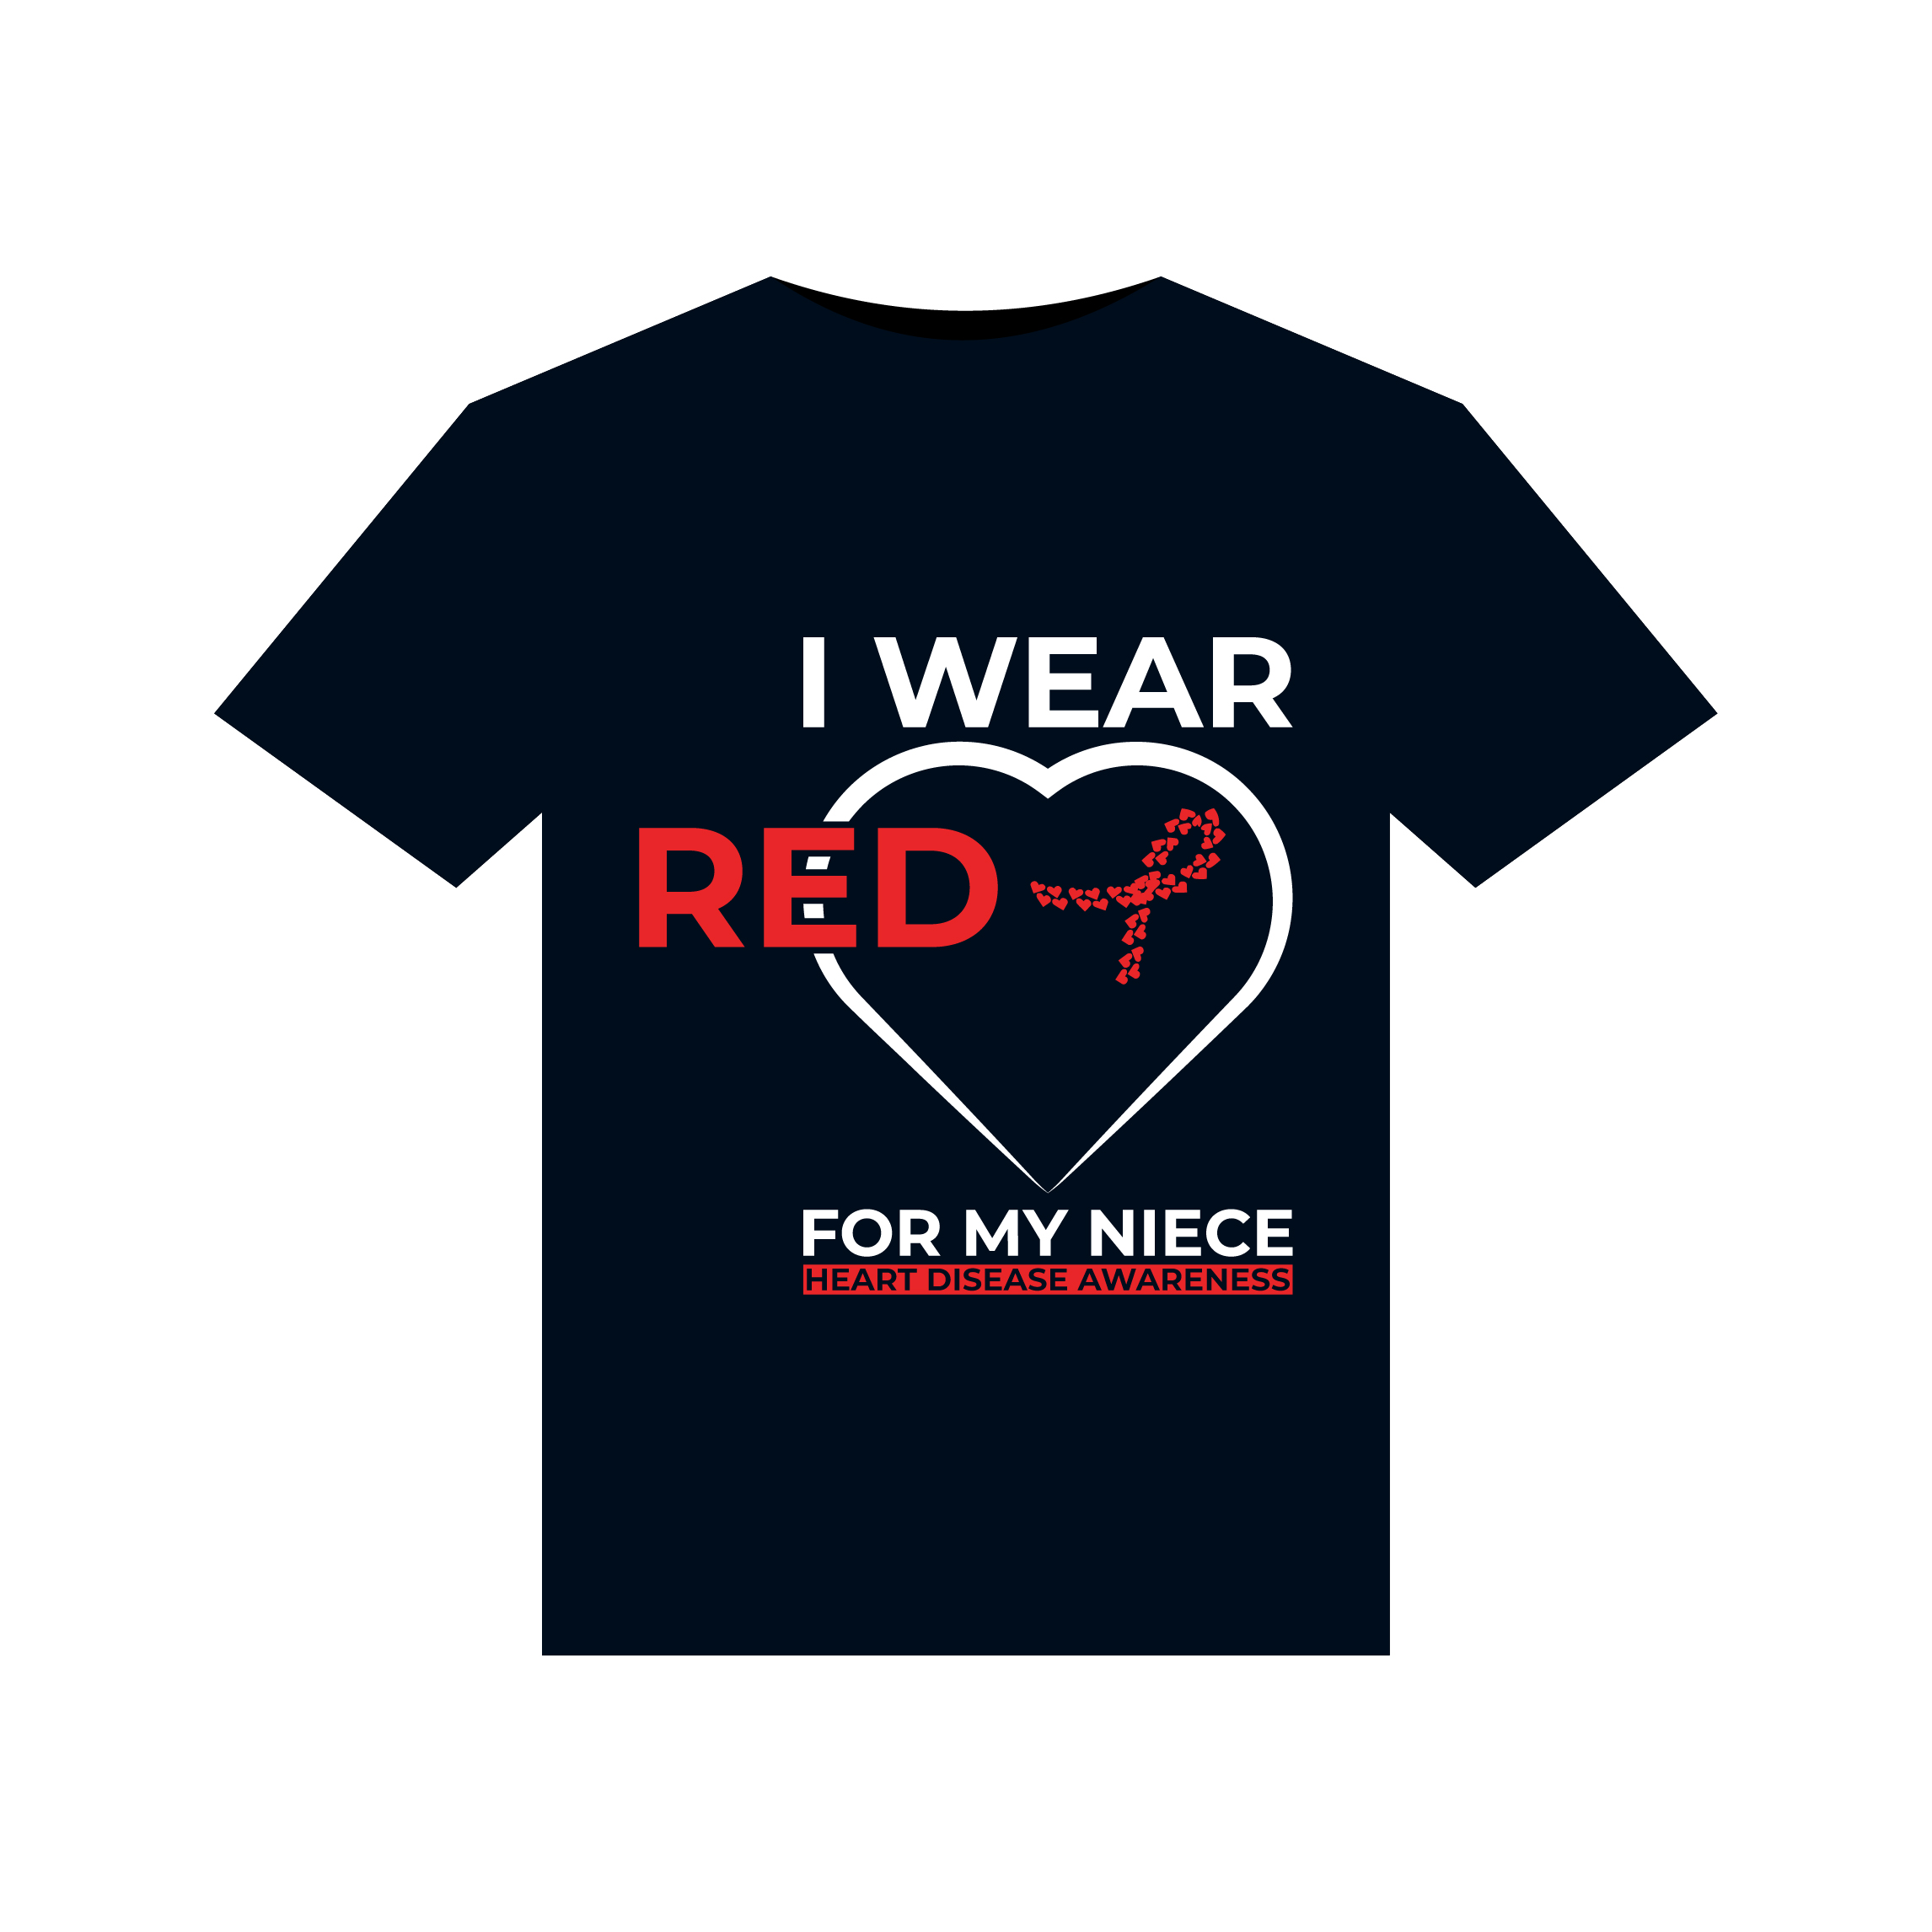 I Wear Red For My Niece Heart Disease Awareness illustrations for print-ready T-Shirts design preview image.